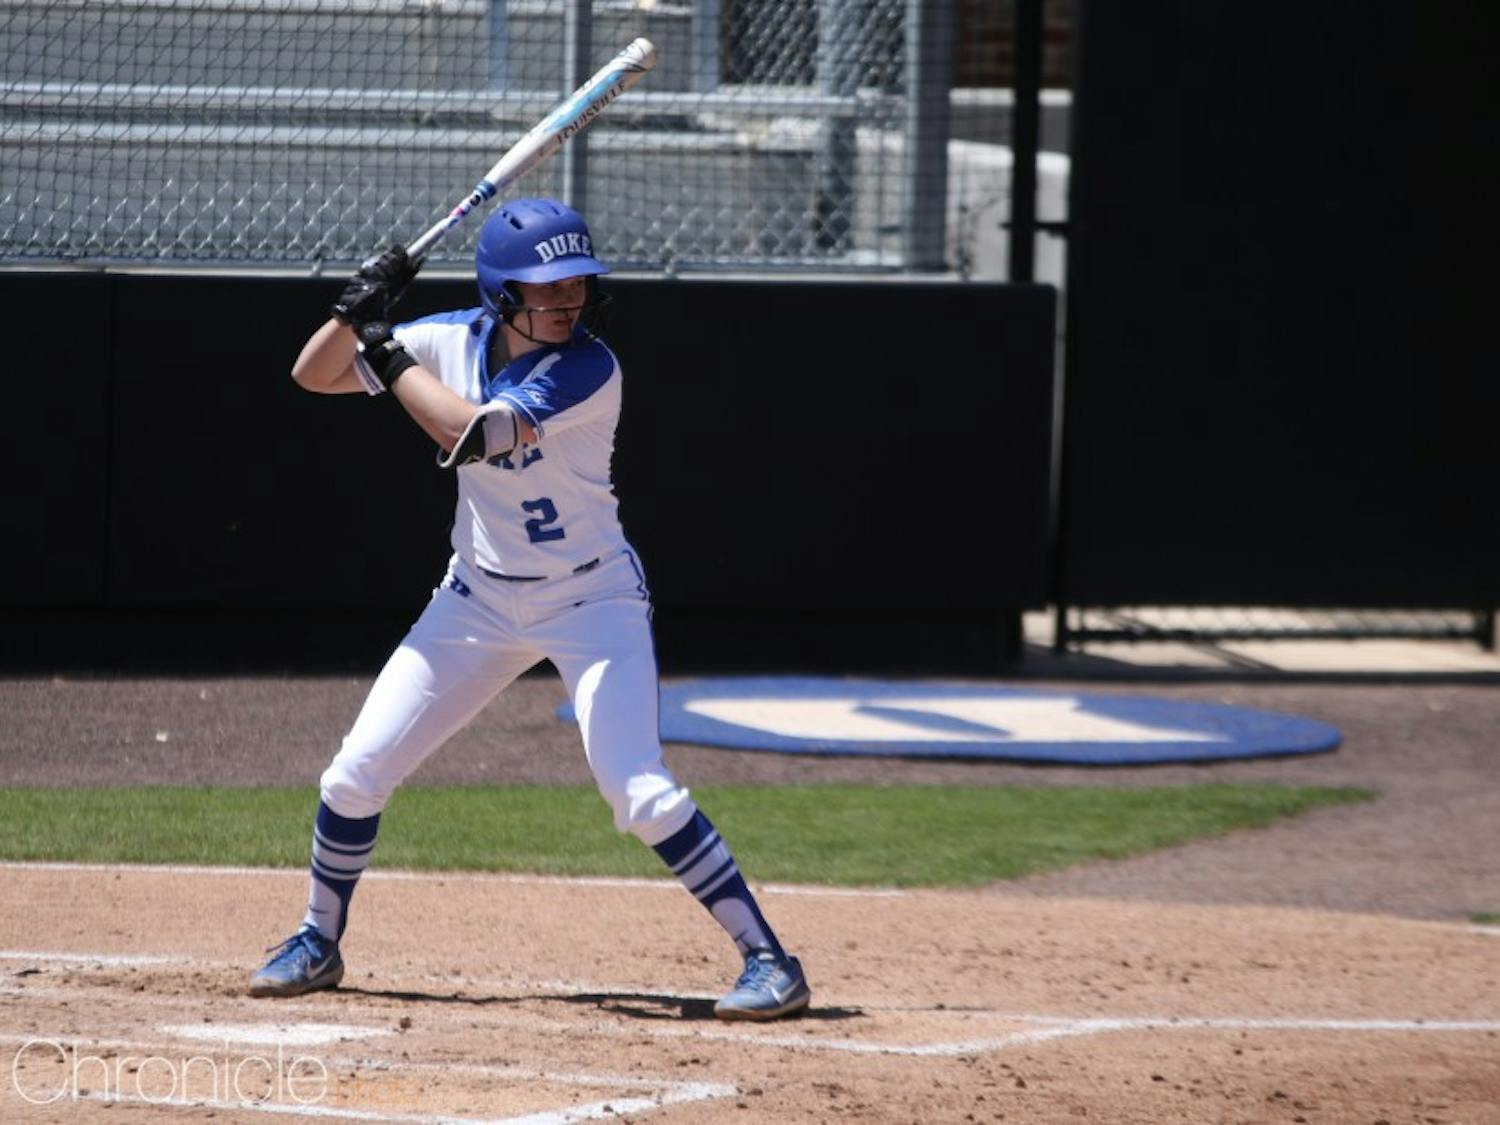 Jameson Kavel led off Duke’s game against Penn State Sunday with a single and scored the first run of the afternoon.